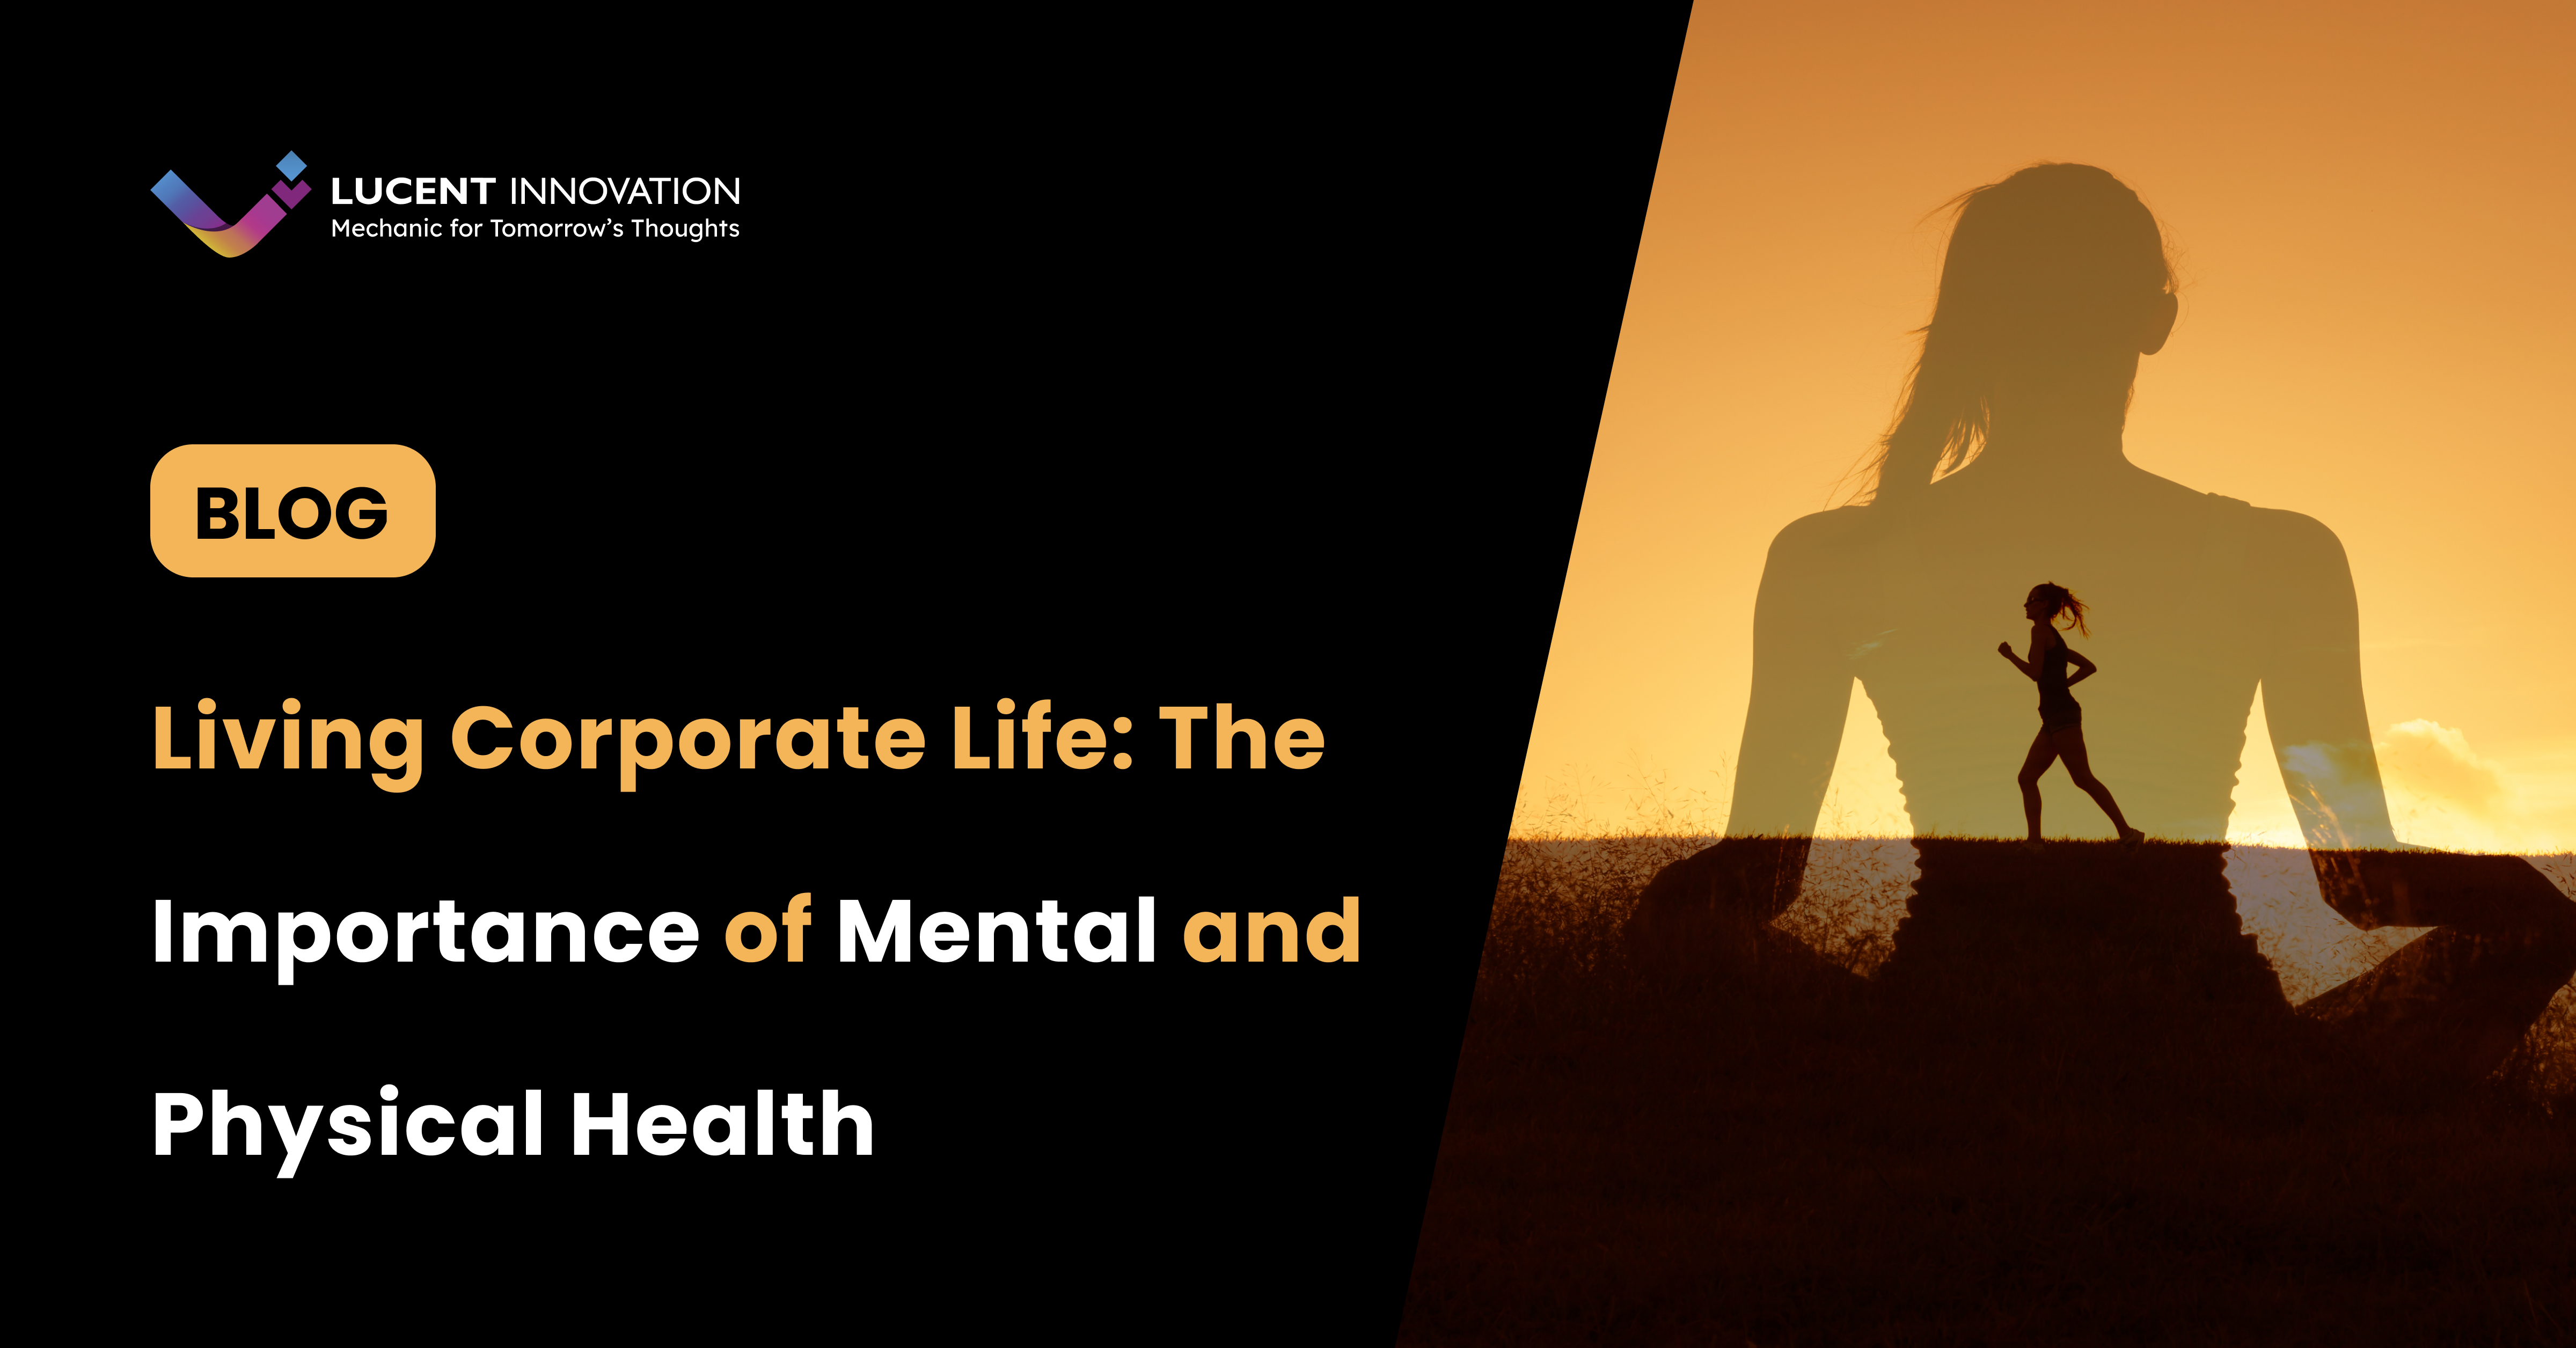 Living Corporate Life: The Importance of Mental and Physical Health